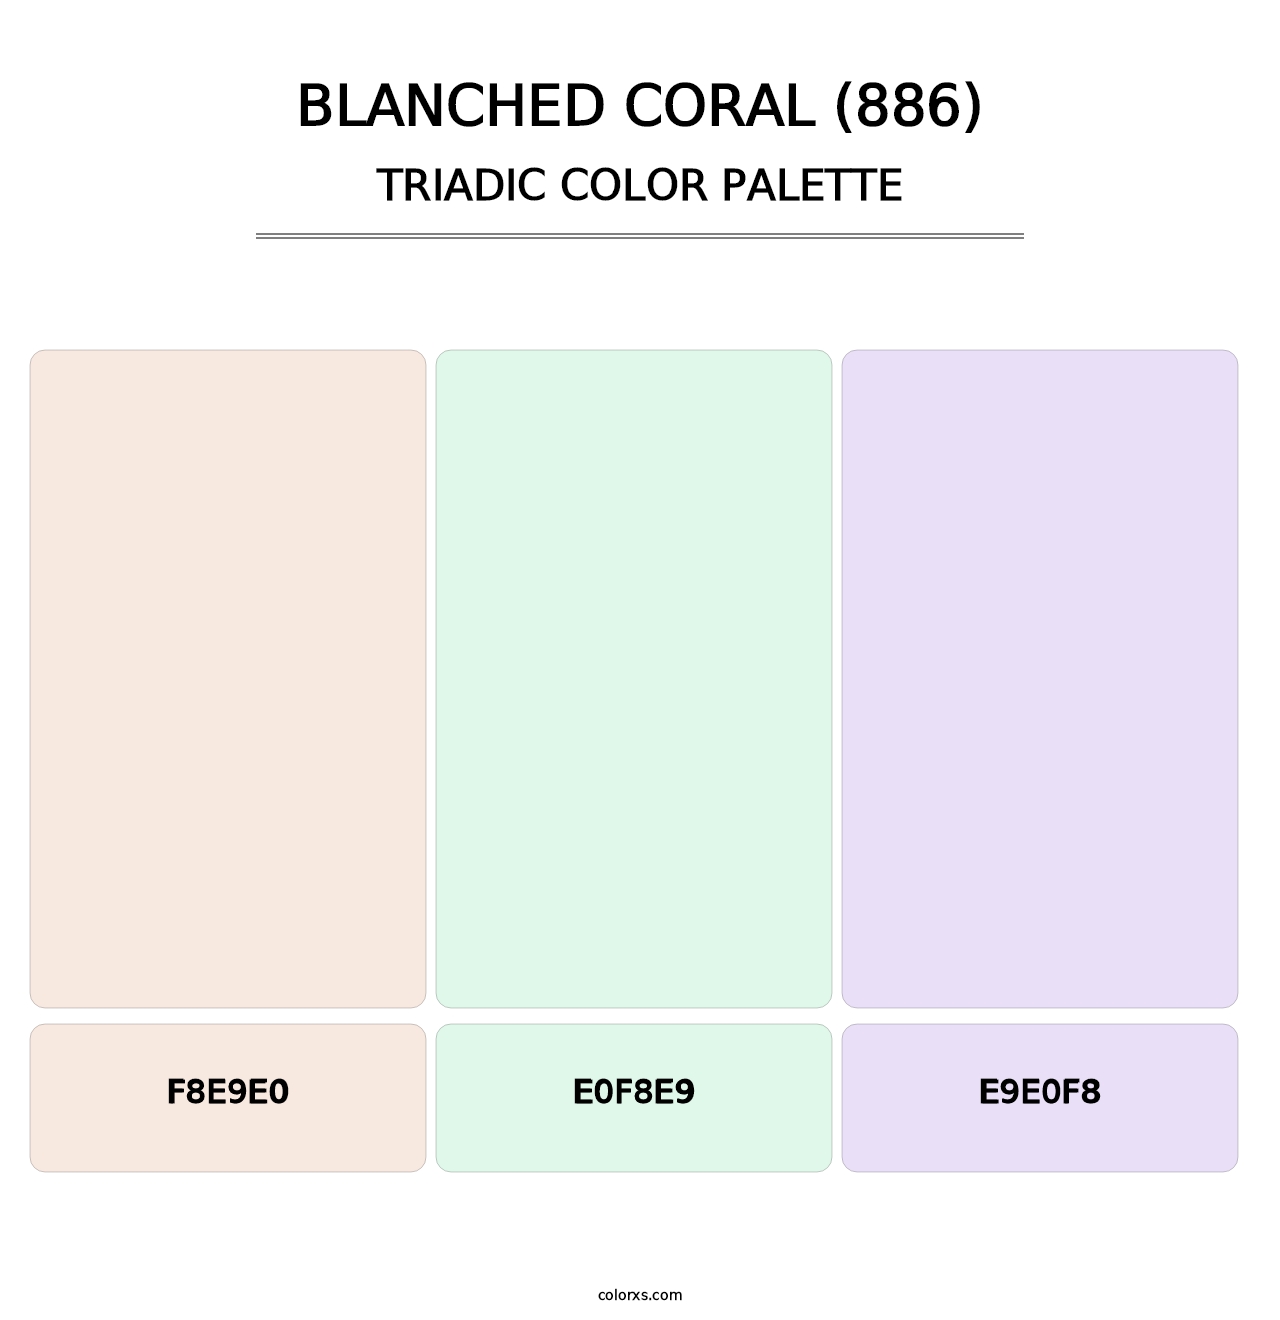 Blanched Coral (886) - Triadic Color Palette